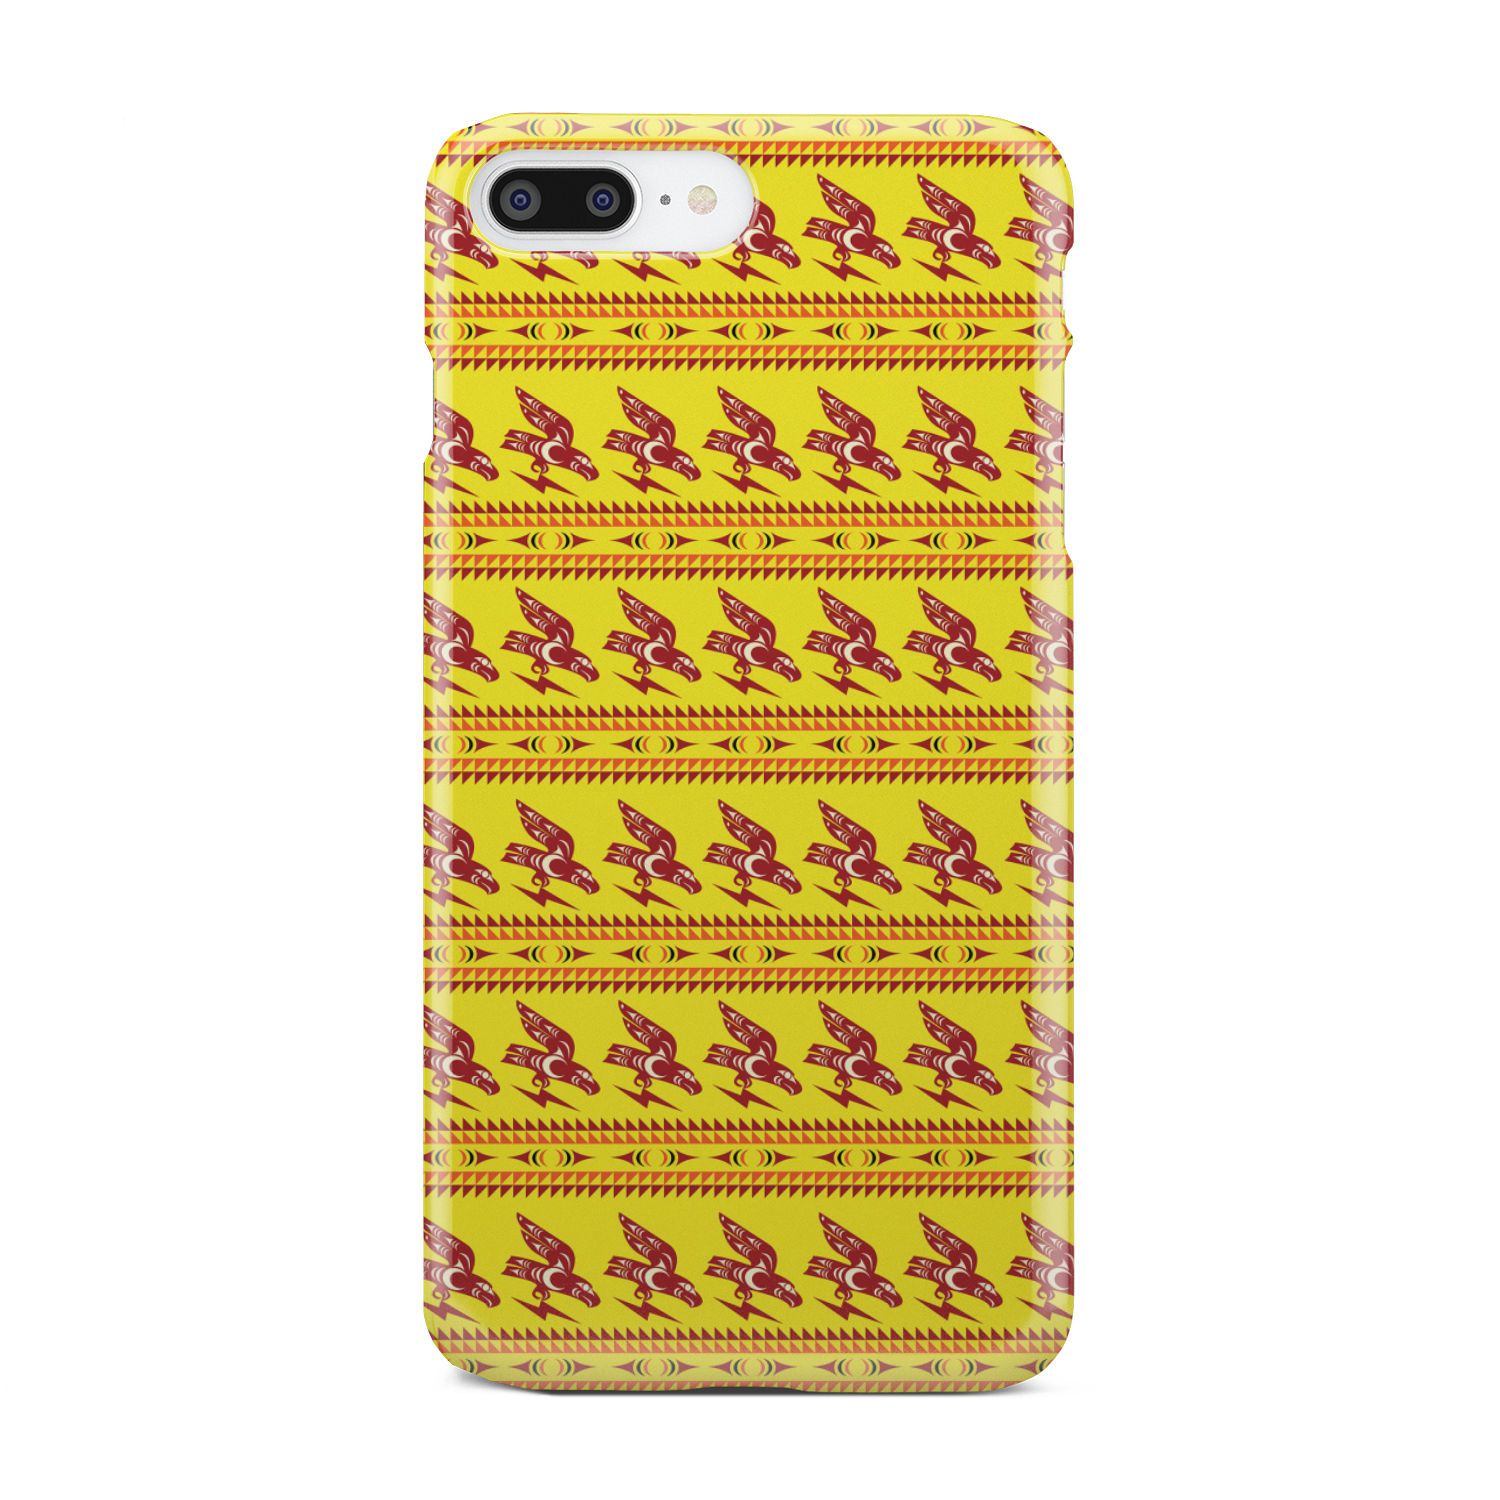 Ovila Mailhot Design : Eagle Brings Good Vibes Yellow Phone Case Phone Case wc-fulfillment iPhone 7 Plus 